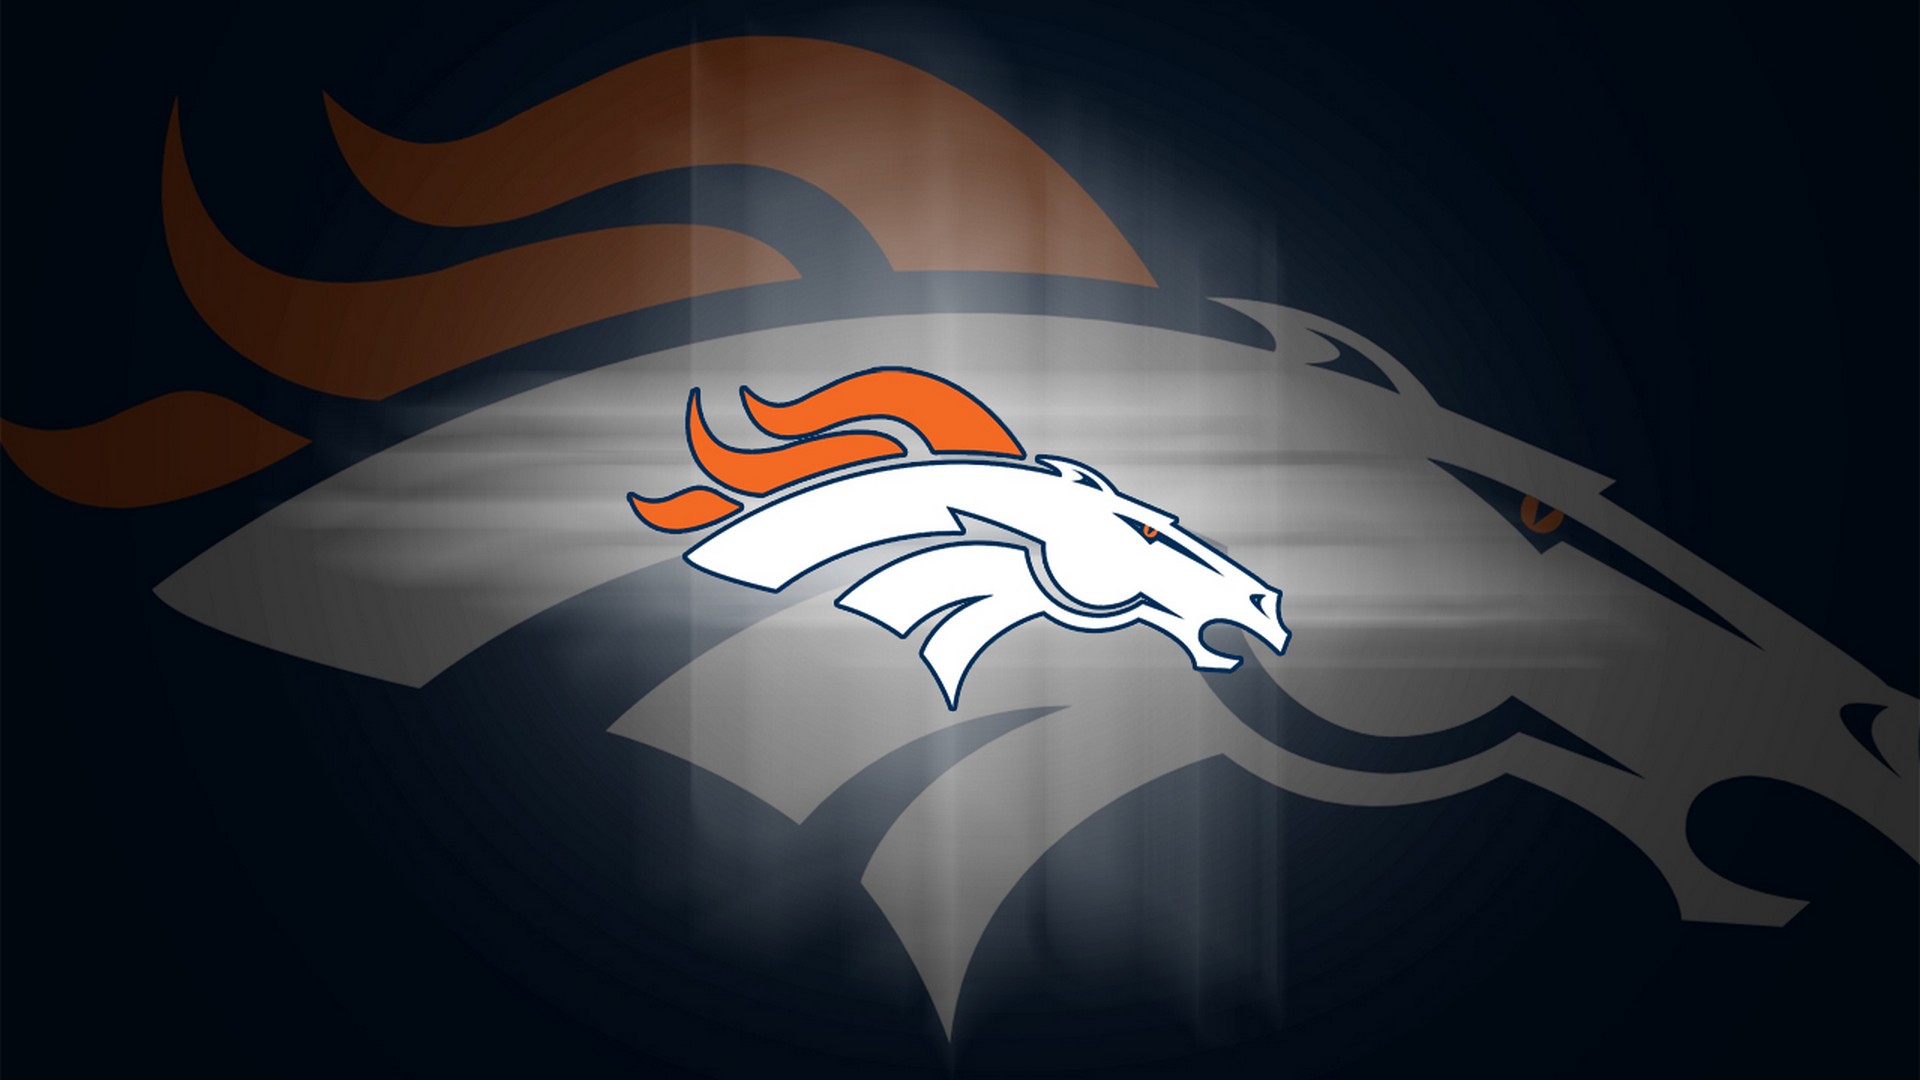 Denver Broncos NFL For Desktop Wallpaper with high-resolution 1920x1080 pixel. You can use this wallpaper for your Mac or Windows Desktop Background, iPhone, Android or Tablet and another Smartphone device